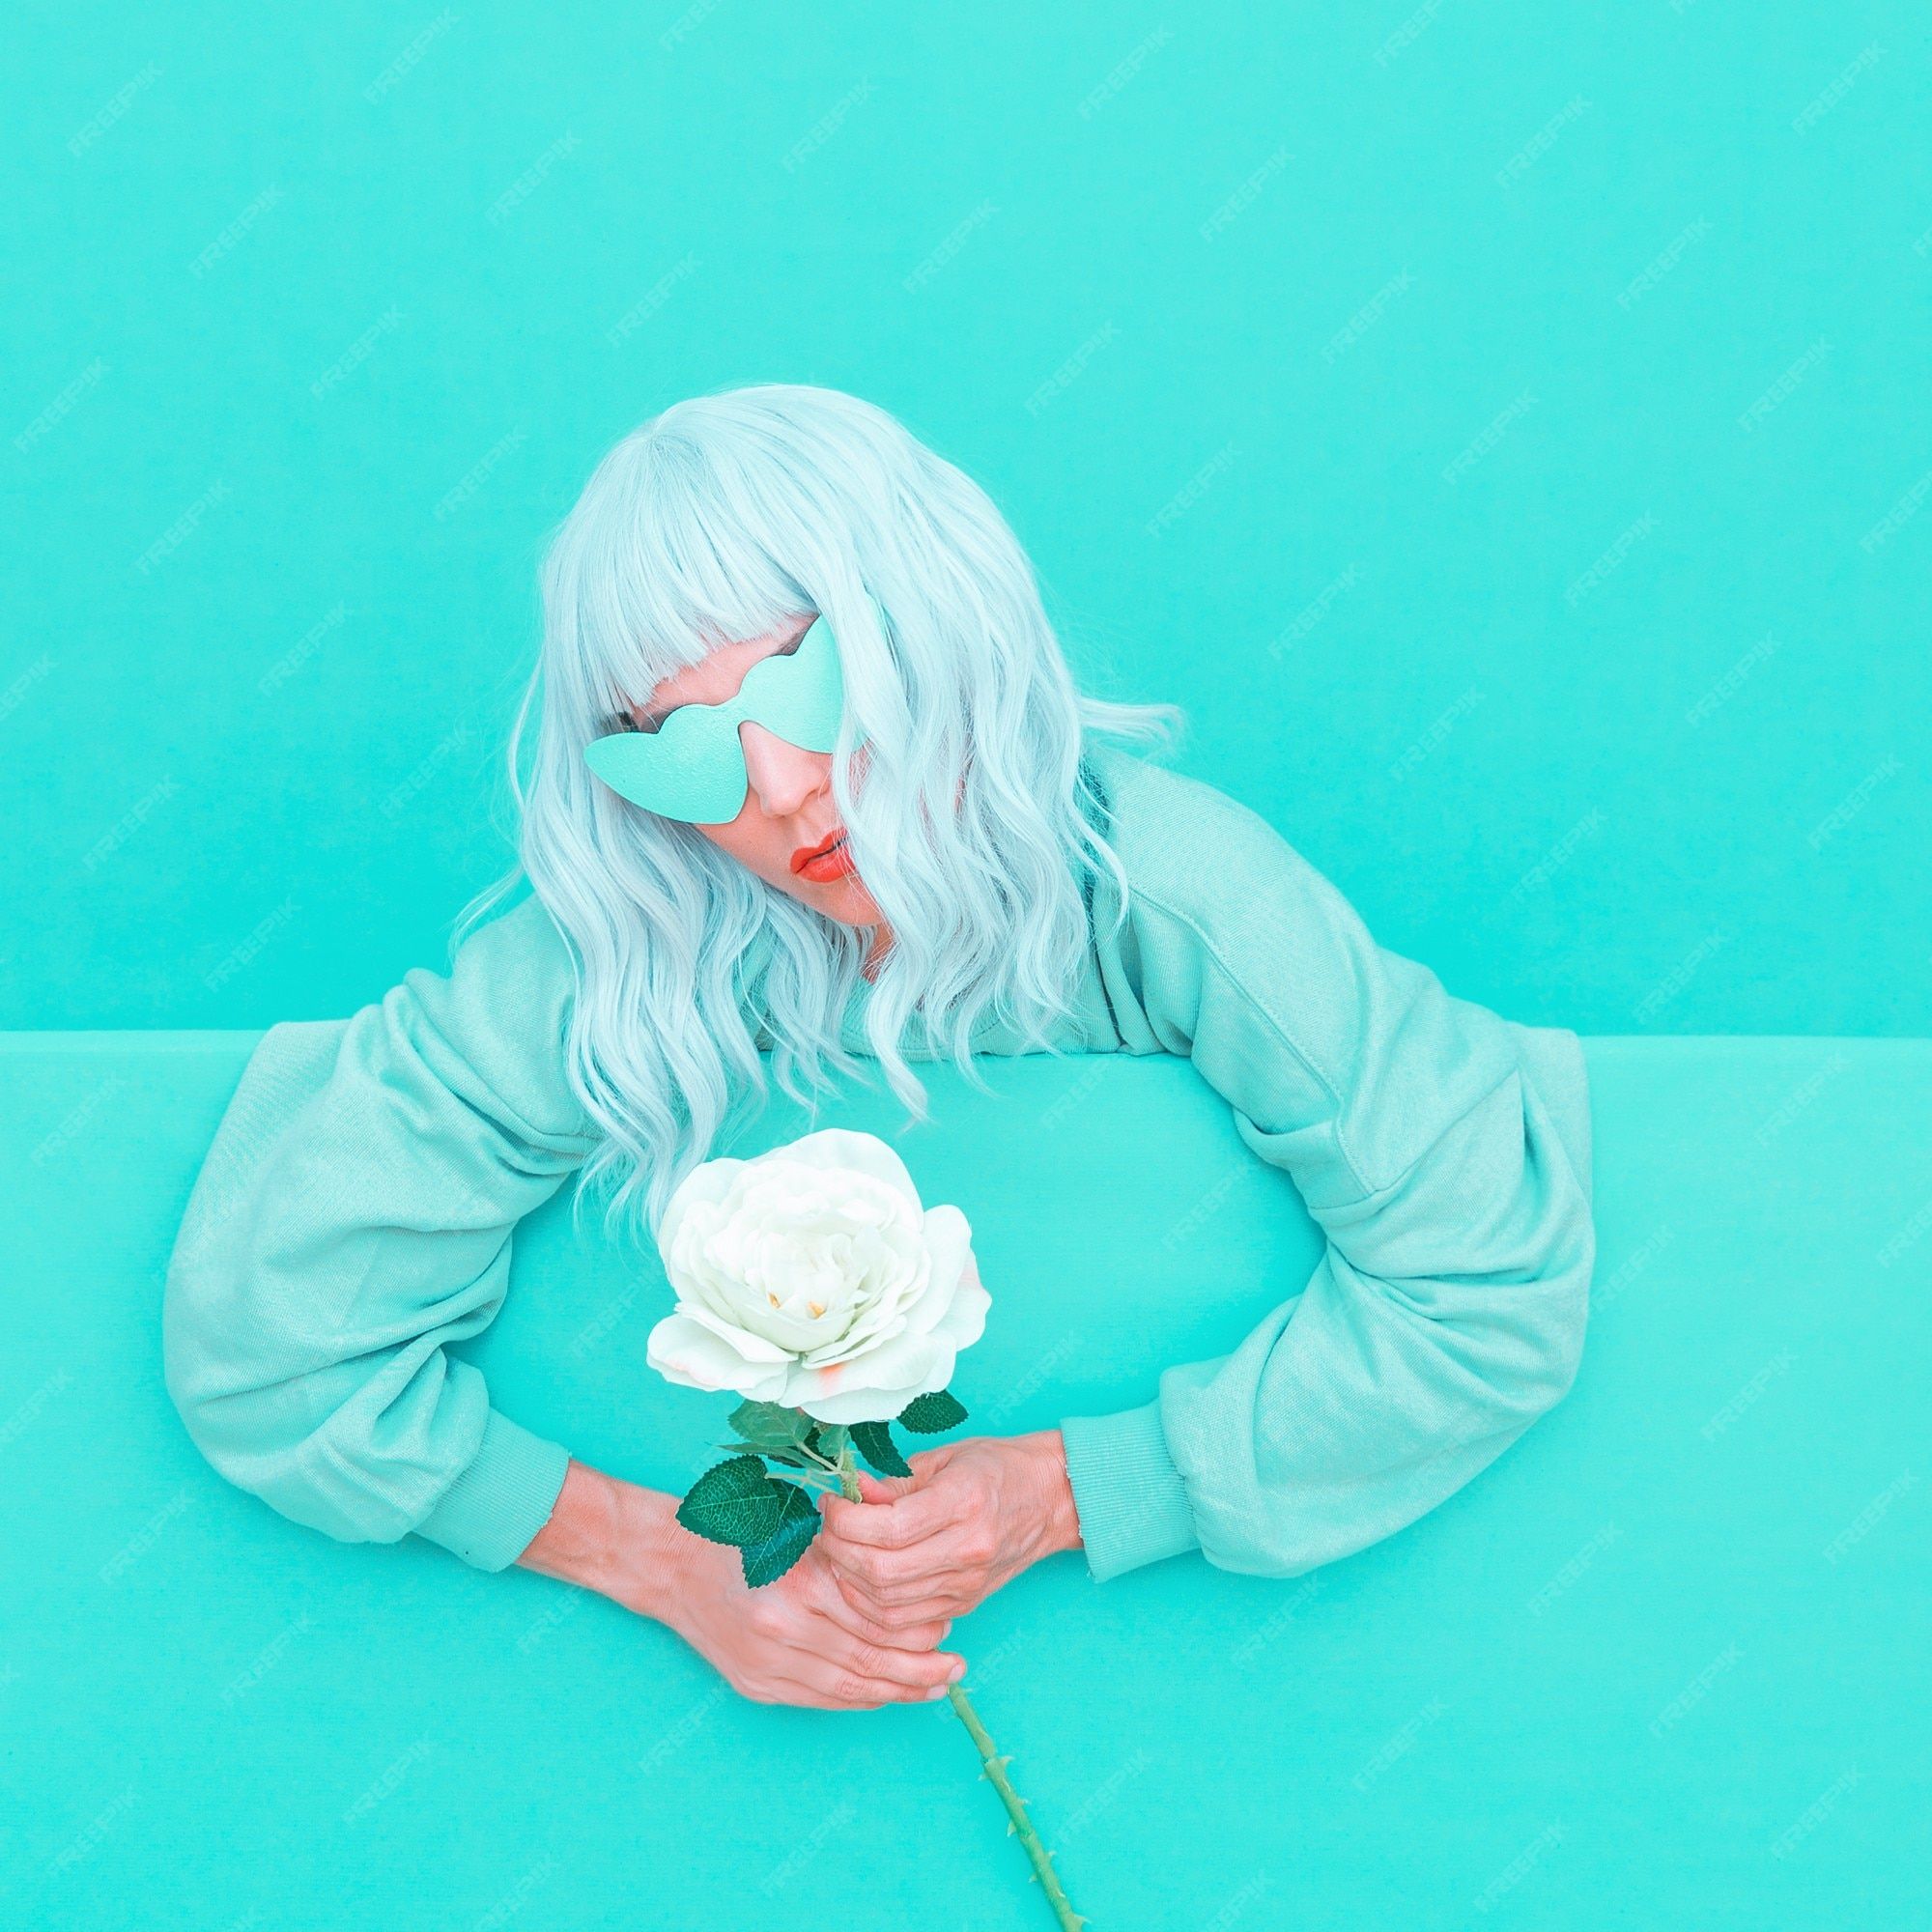 A woman with blue hair and sunglasses holding a white rose against a blue background. - Aqua